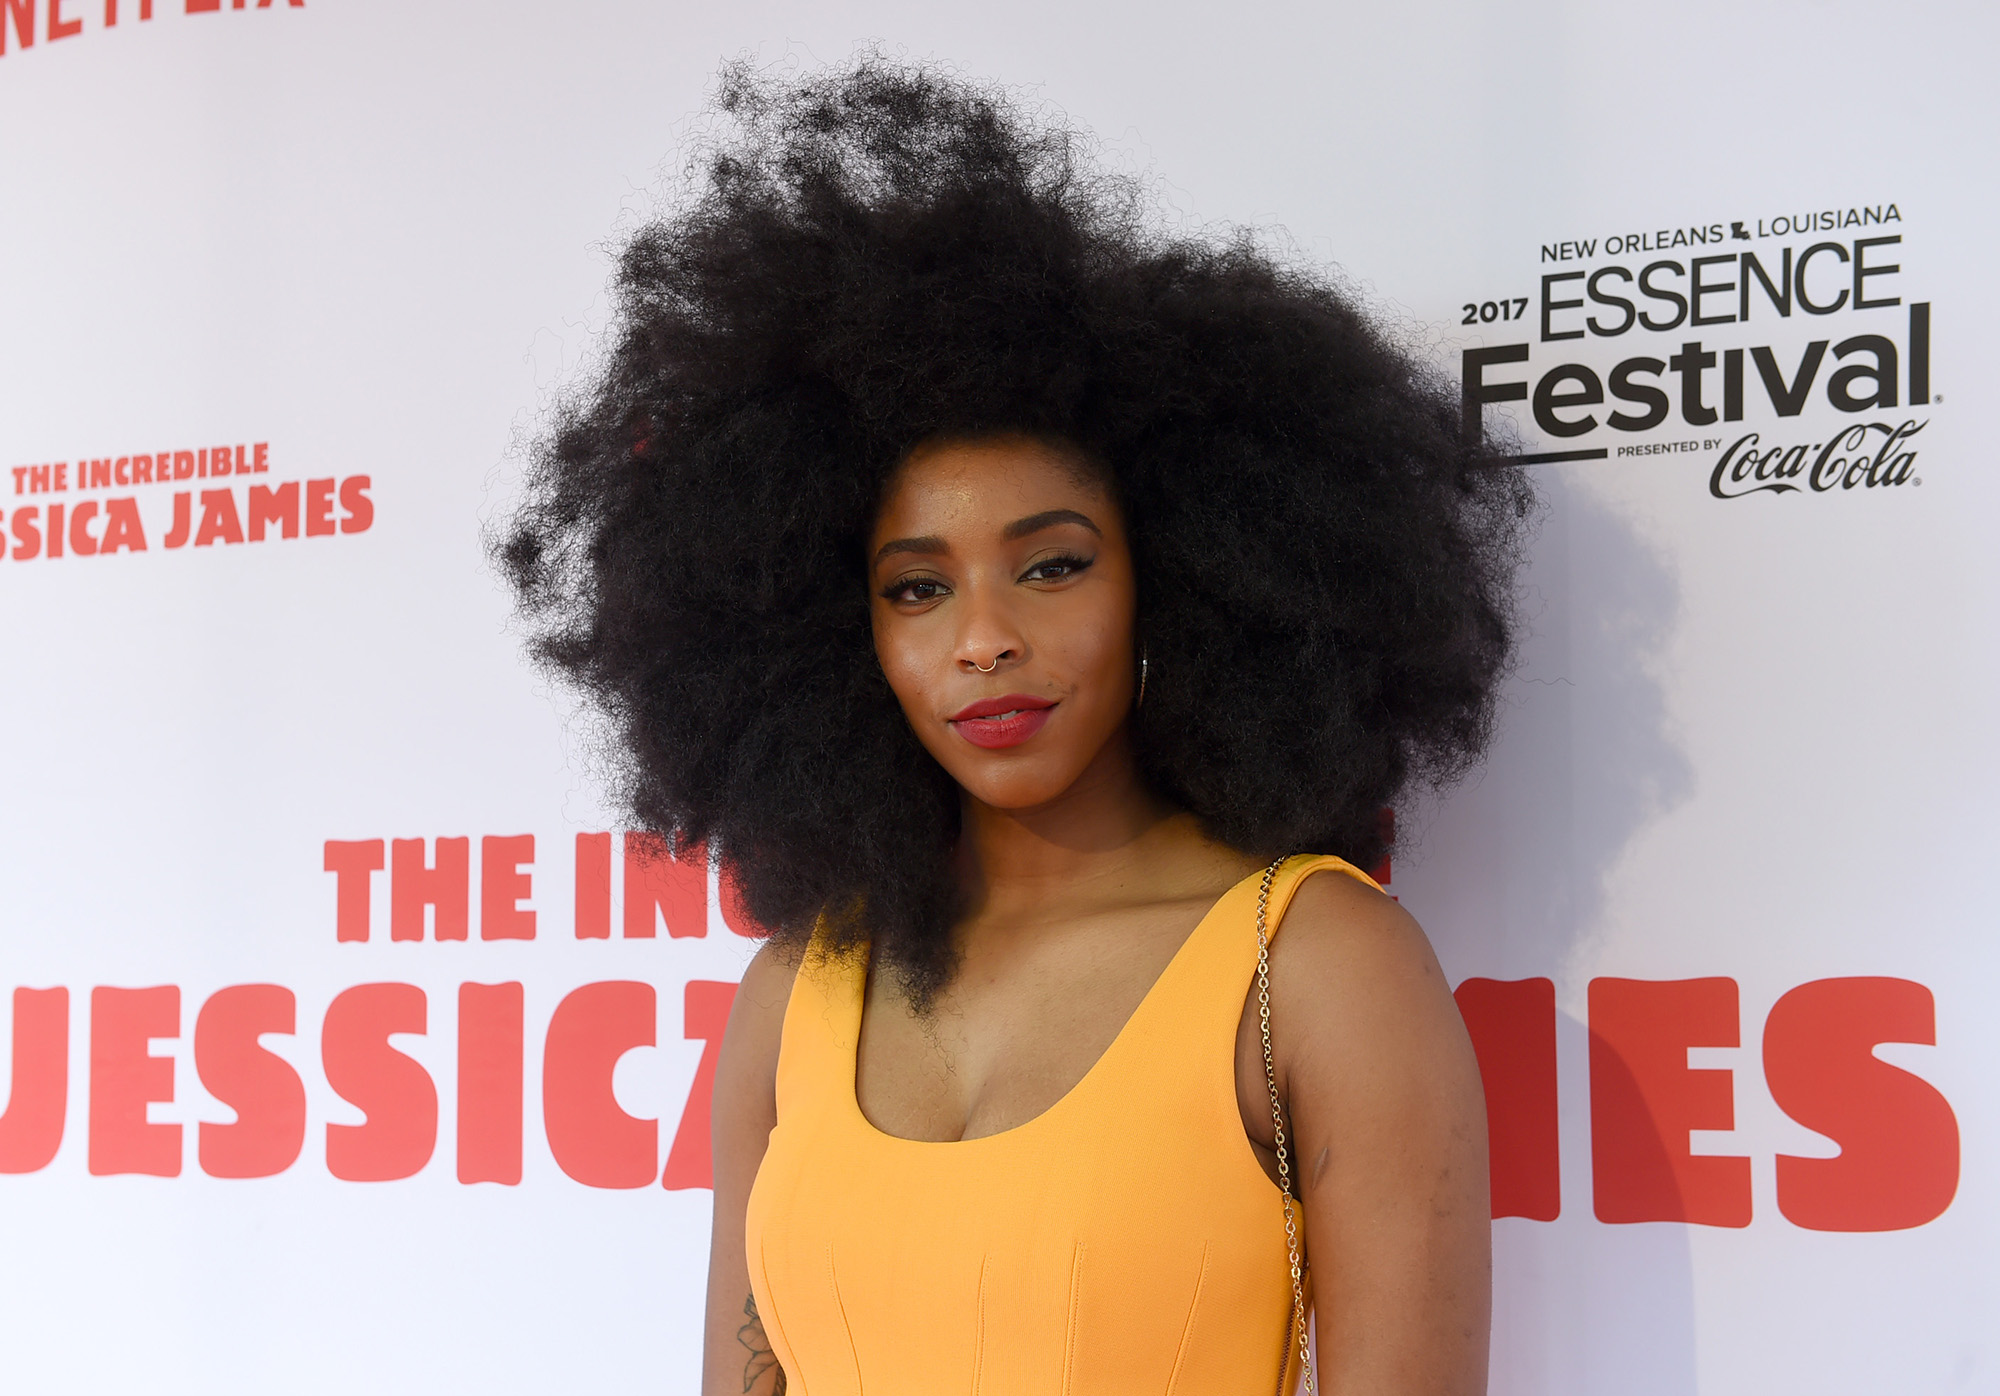 Premiere Of Netflix Original Film "The Incredible Jessica James" At The 2017 Essence Festival